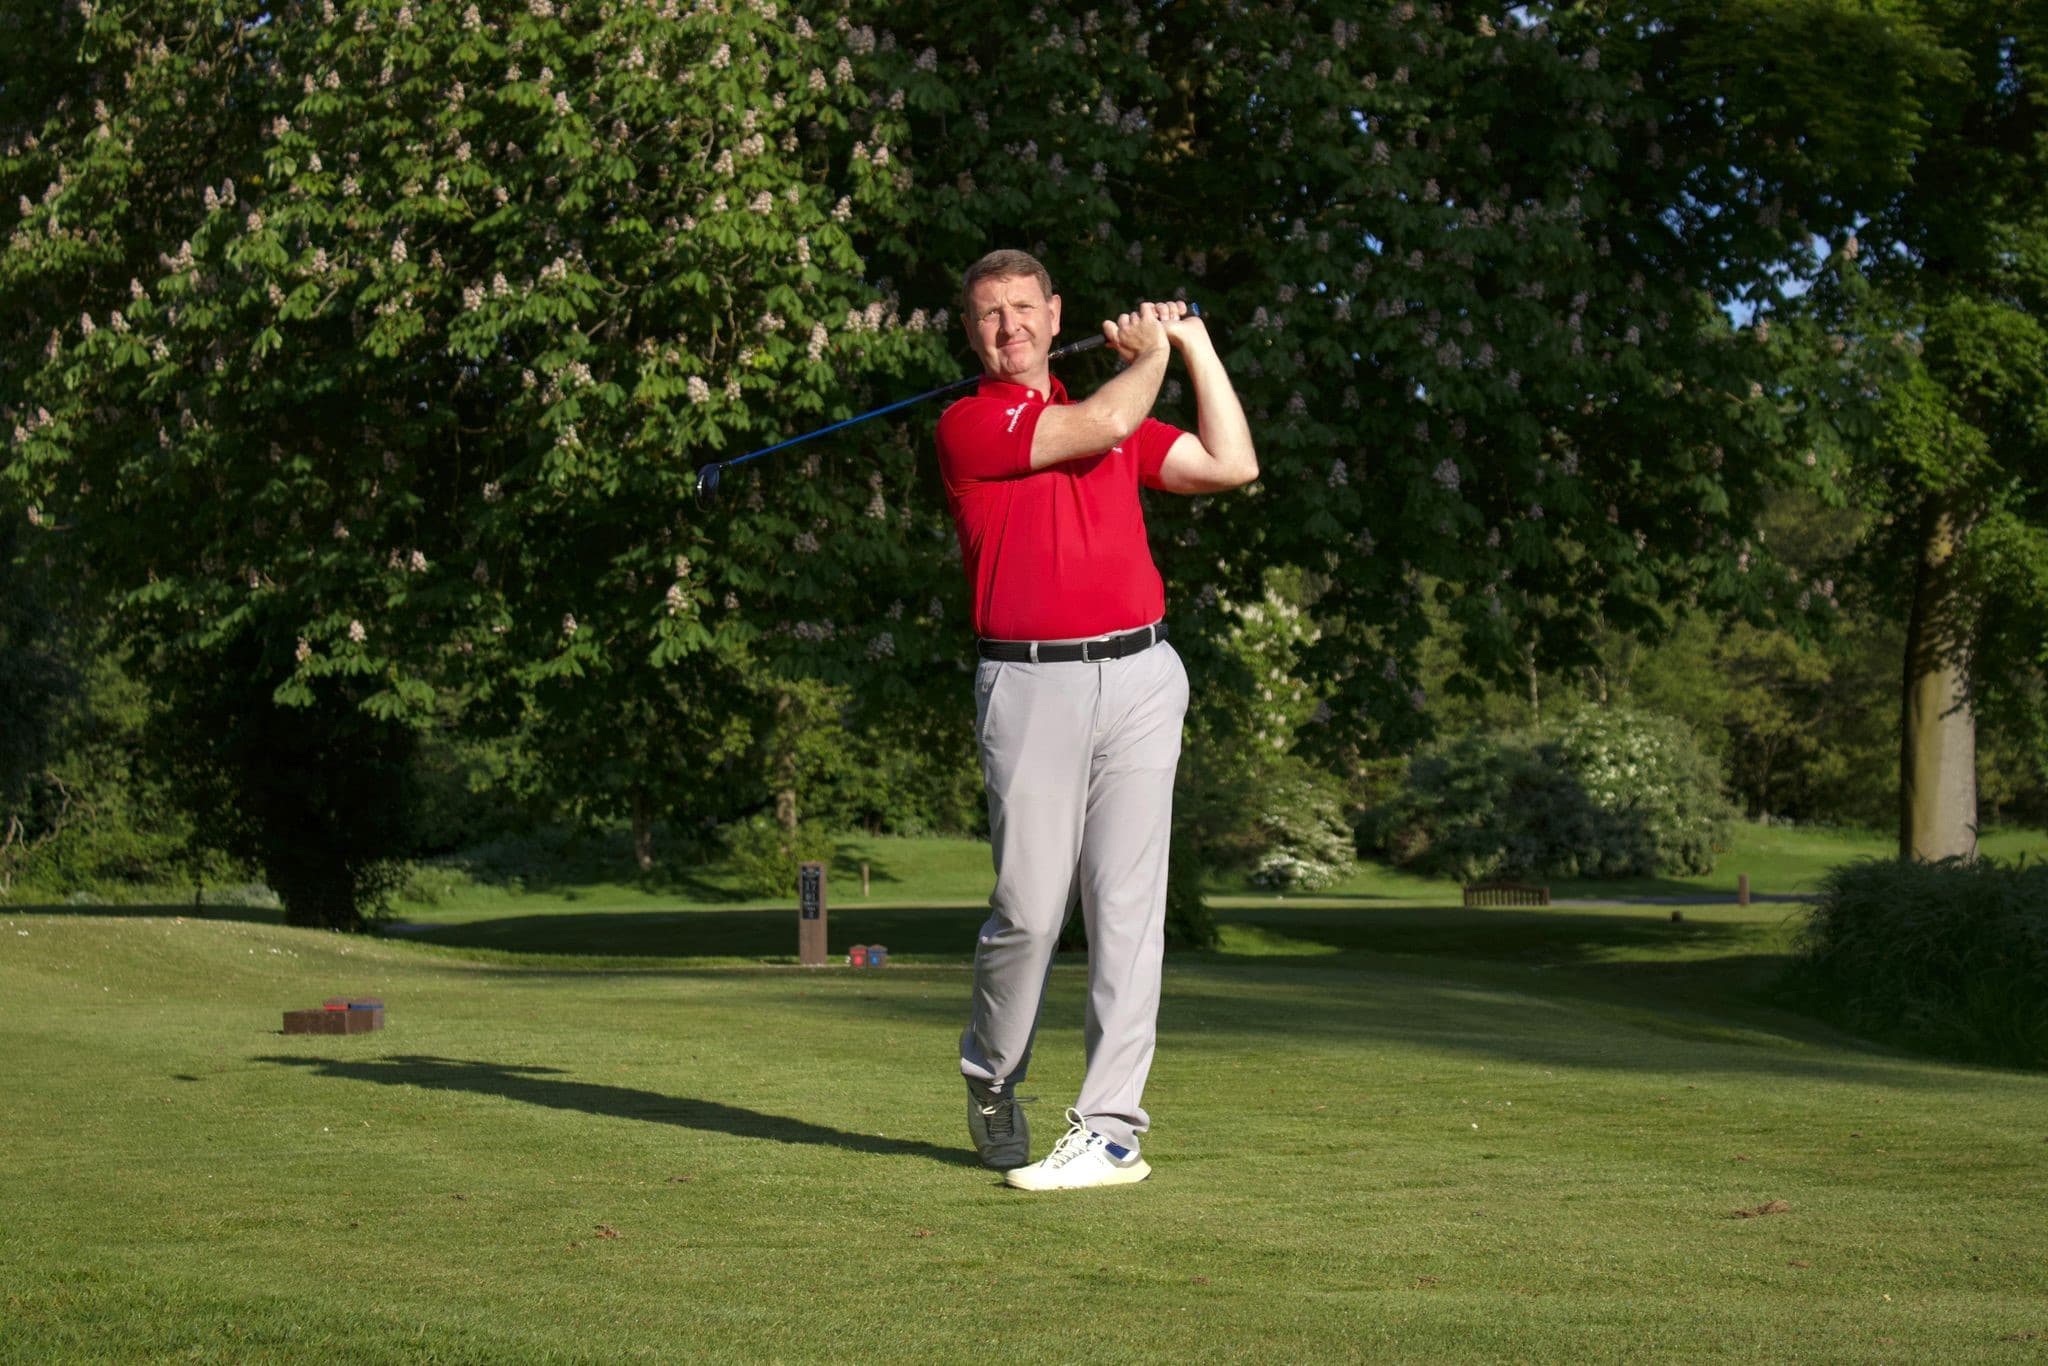 7 Keys to Recover Your Lost Golf Swing